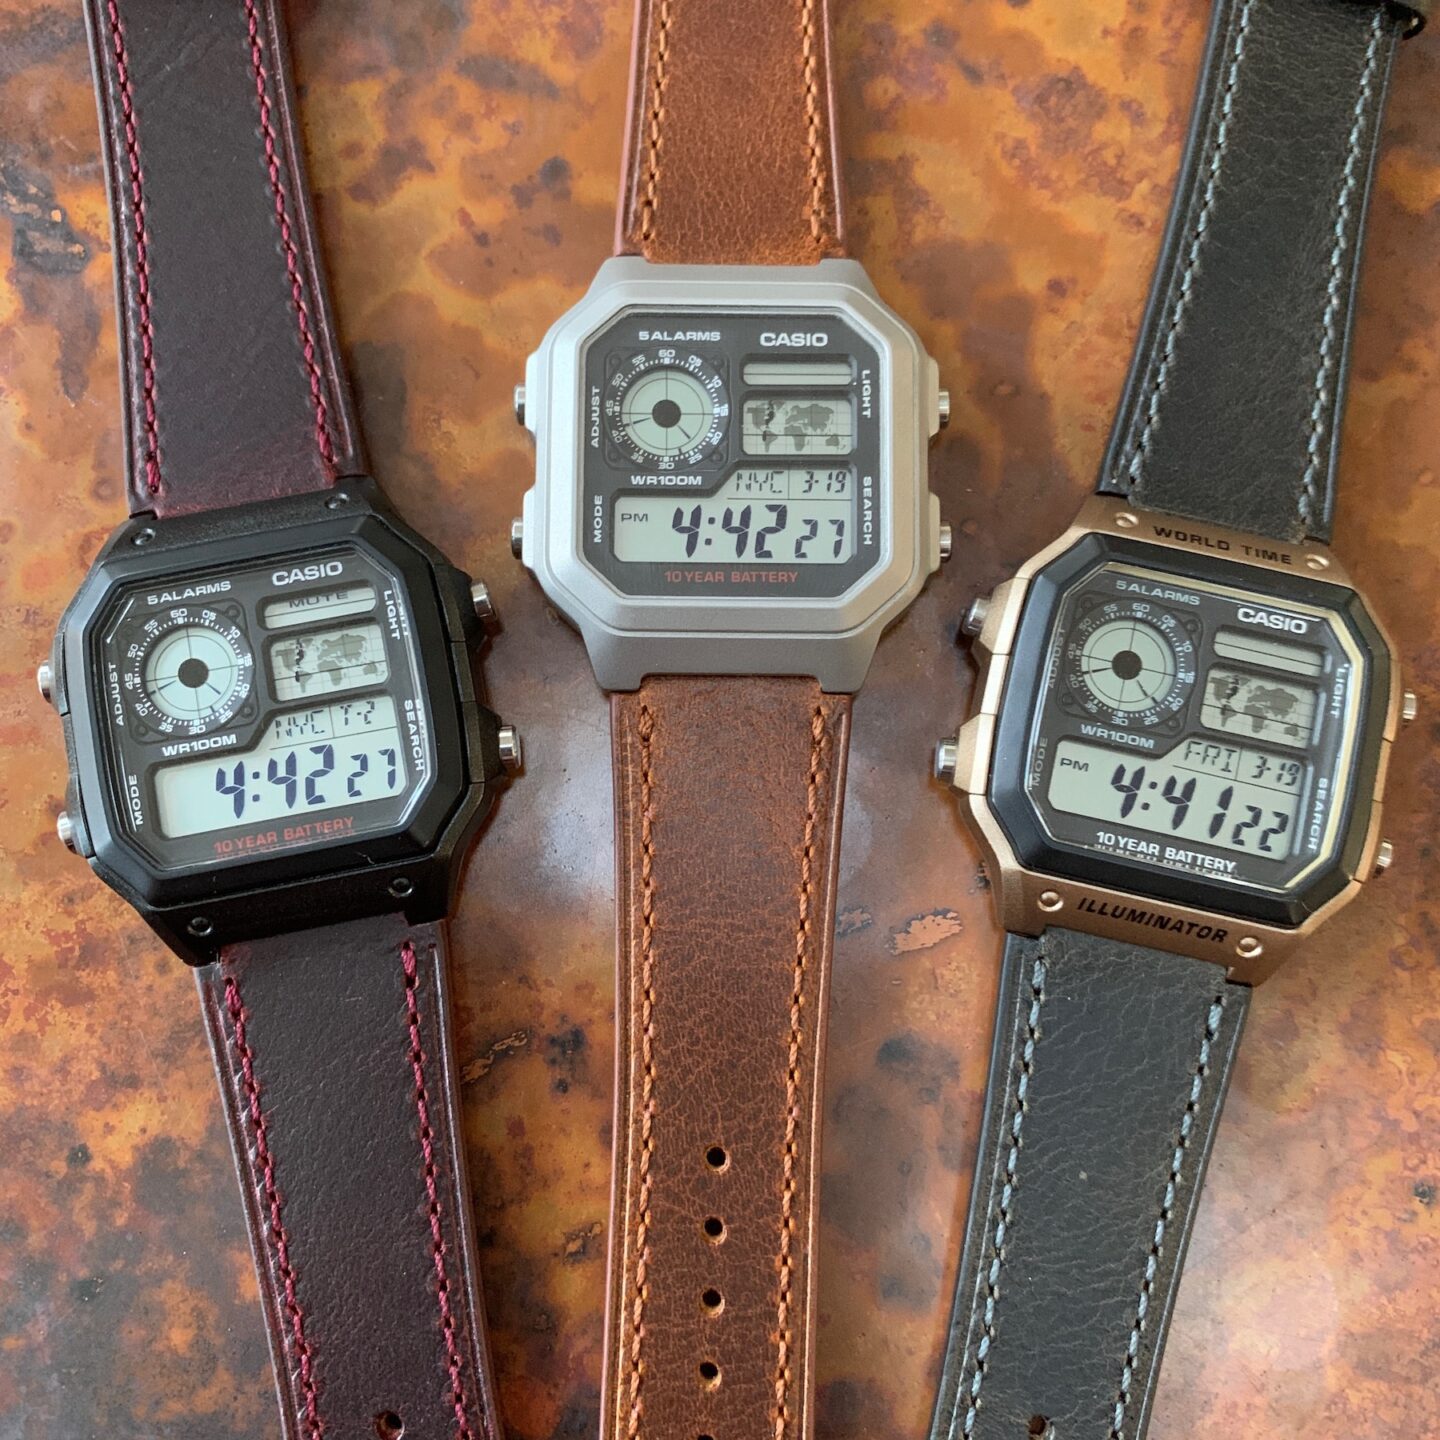 How To Adjust A Casio Watch Band